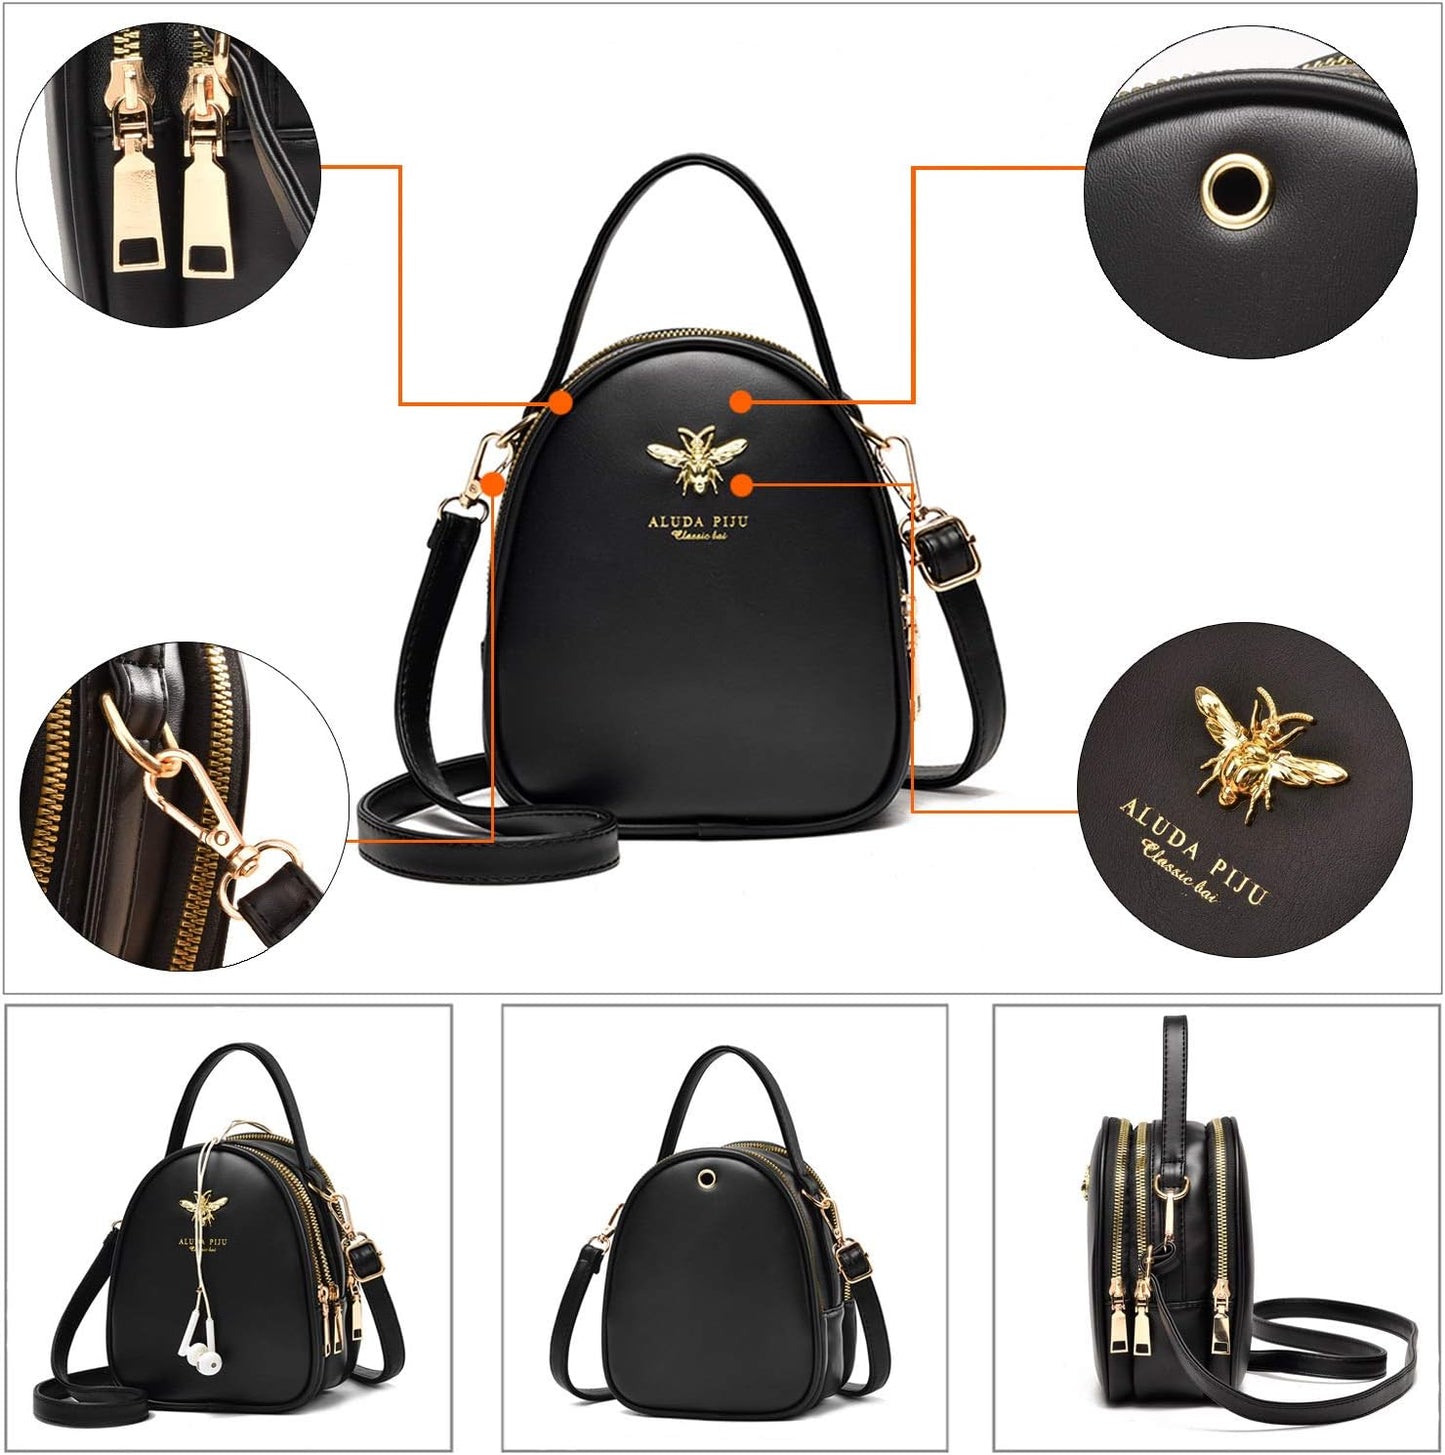 "Chic and Stylish Small Crossbody Shoulder Bag for Women - Perfect for Everyday Essentials!"